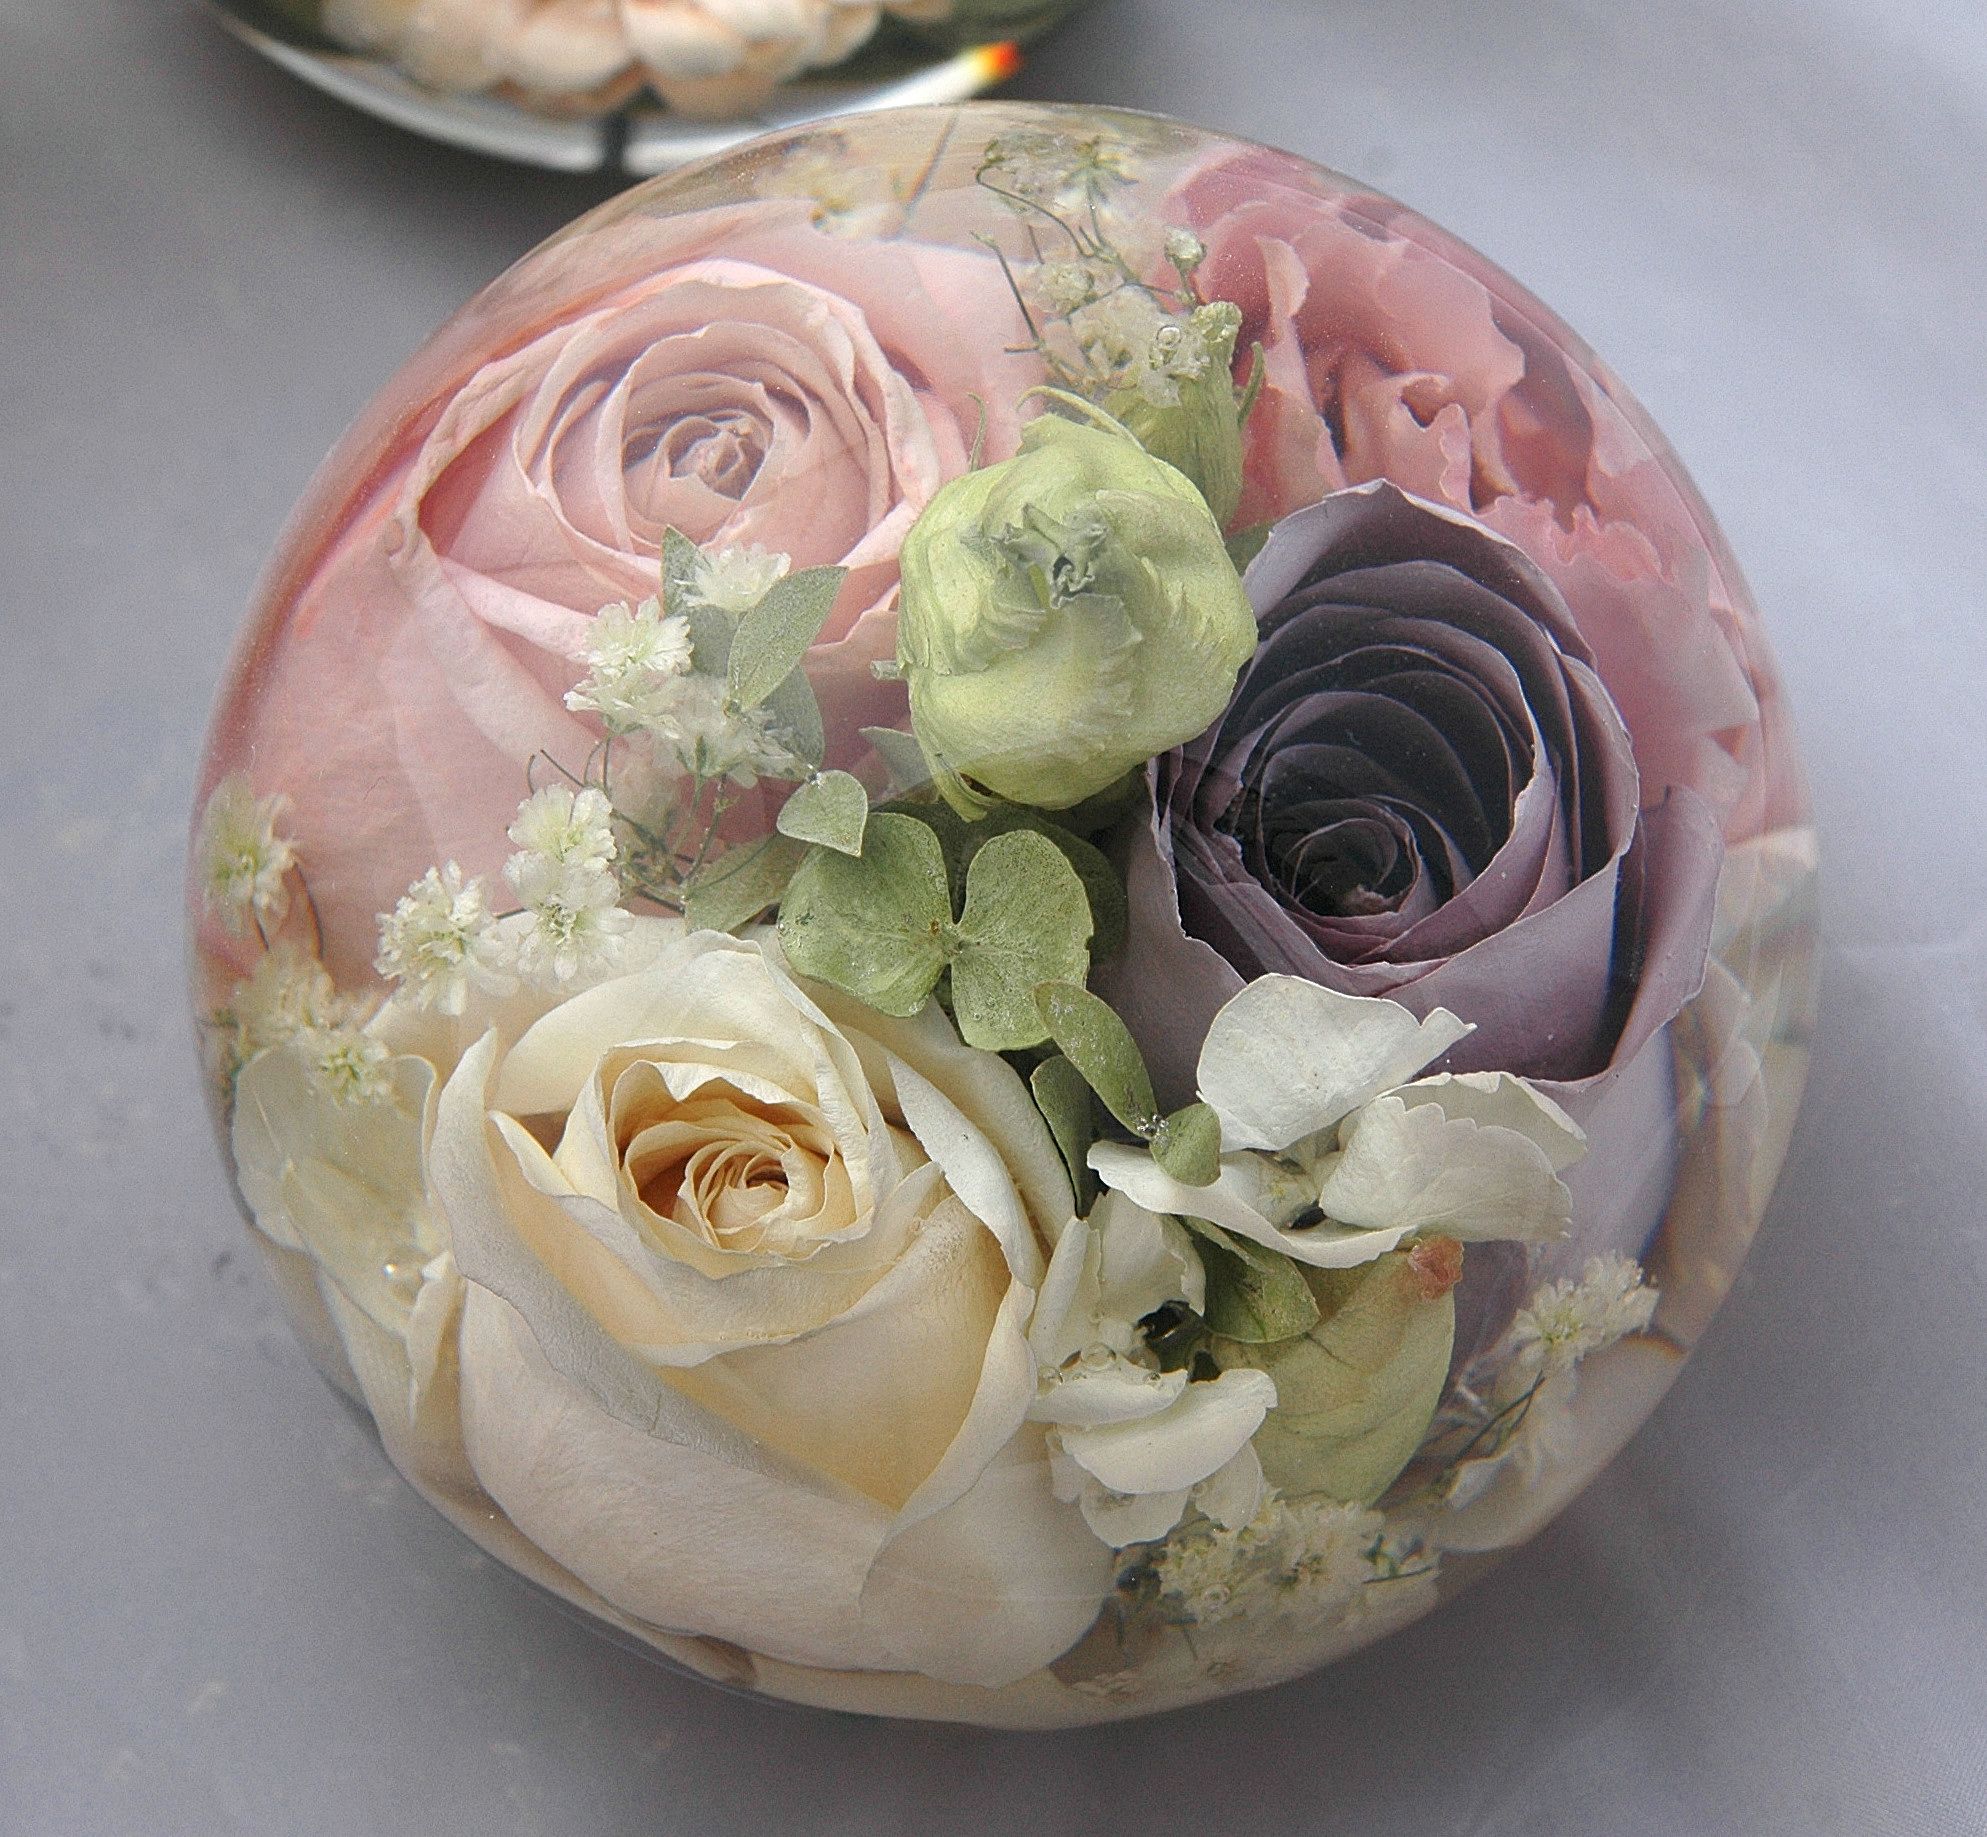 flower preservation the best way to keep your lovely bridal flowers ...